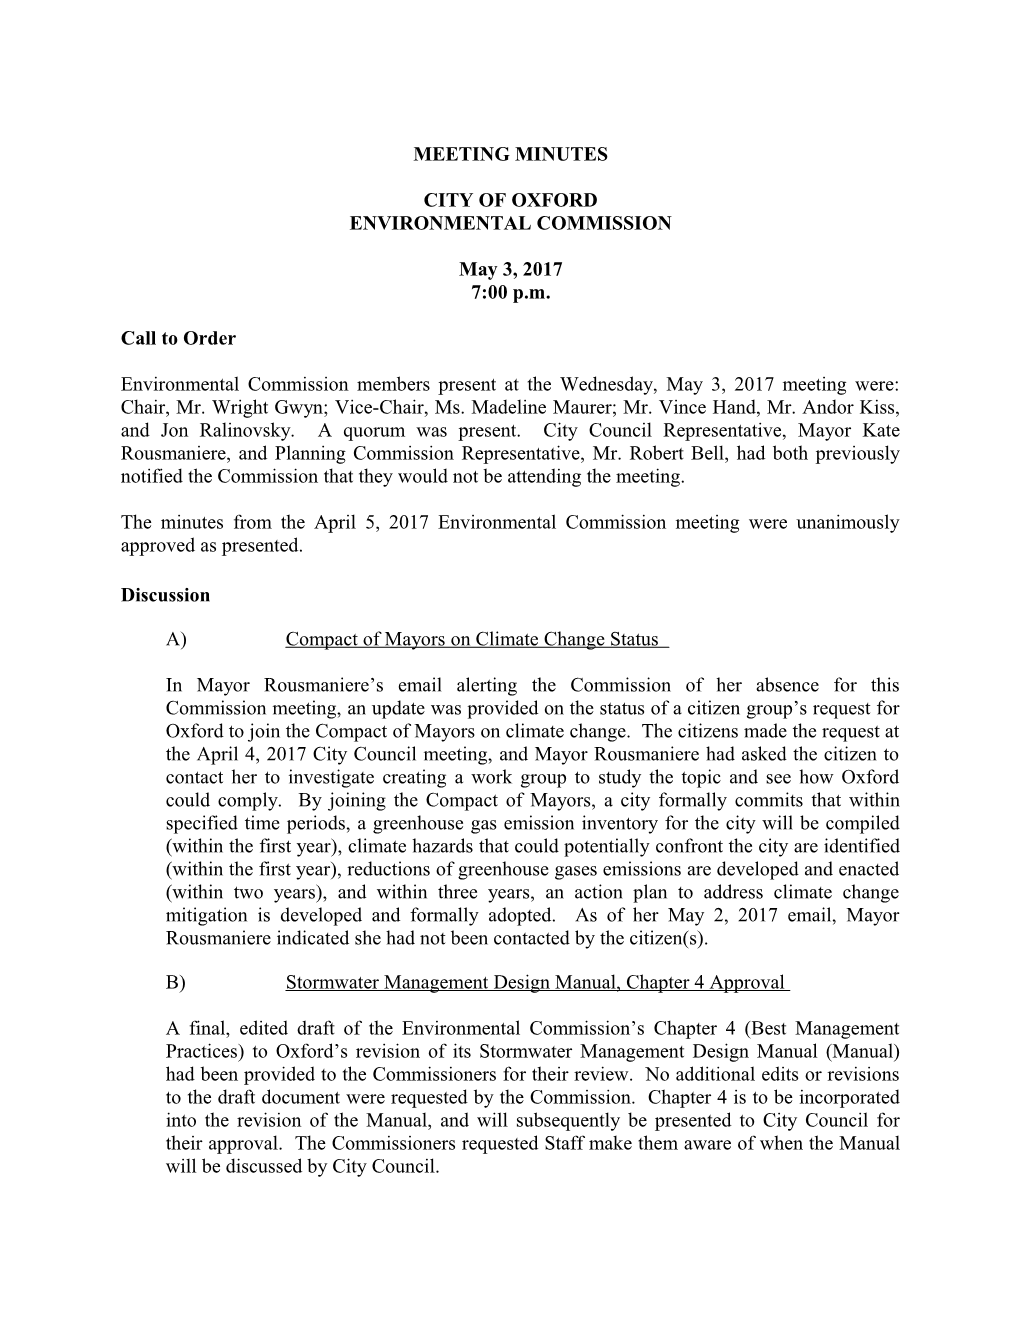 Environmental Commission Minutes Page 2 s1